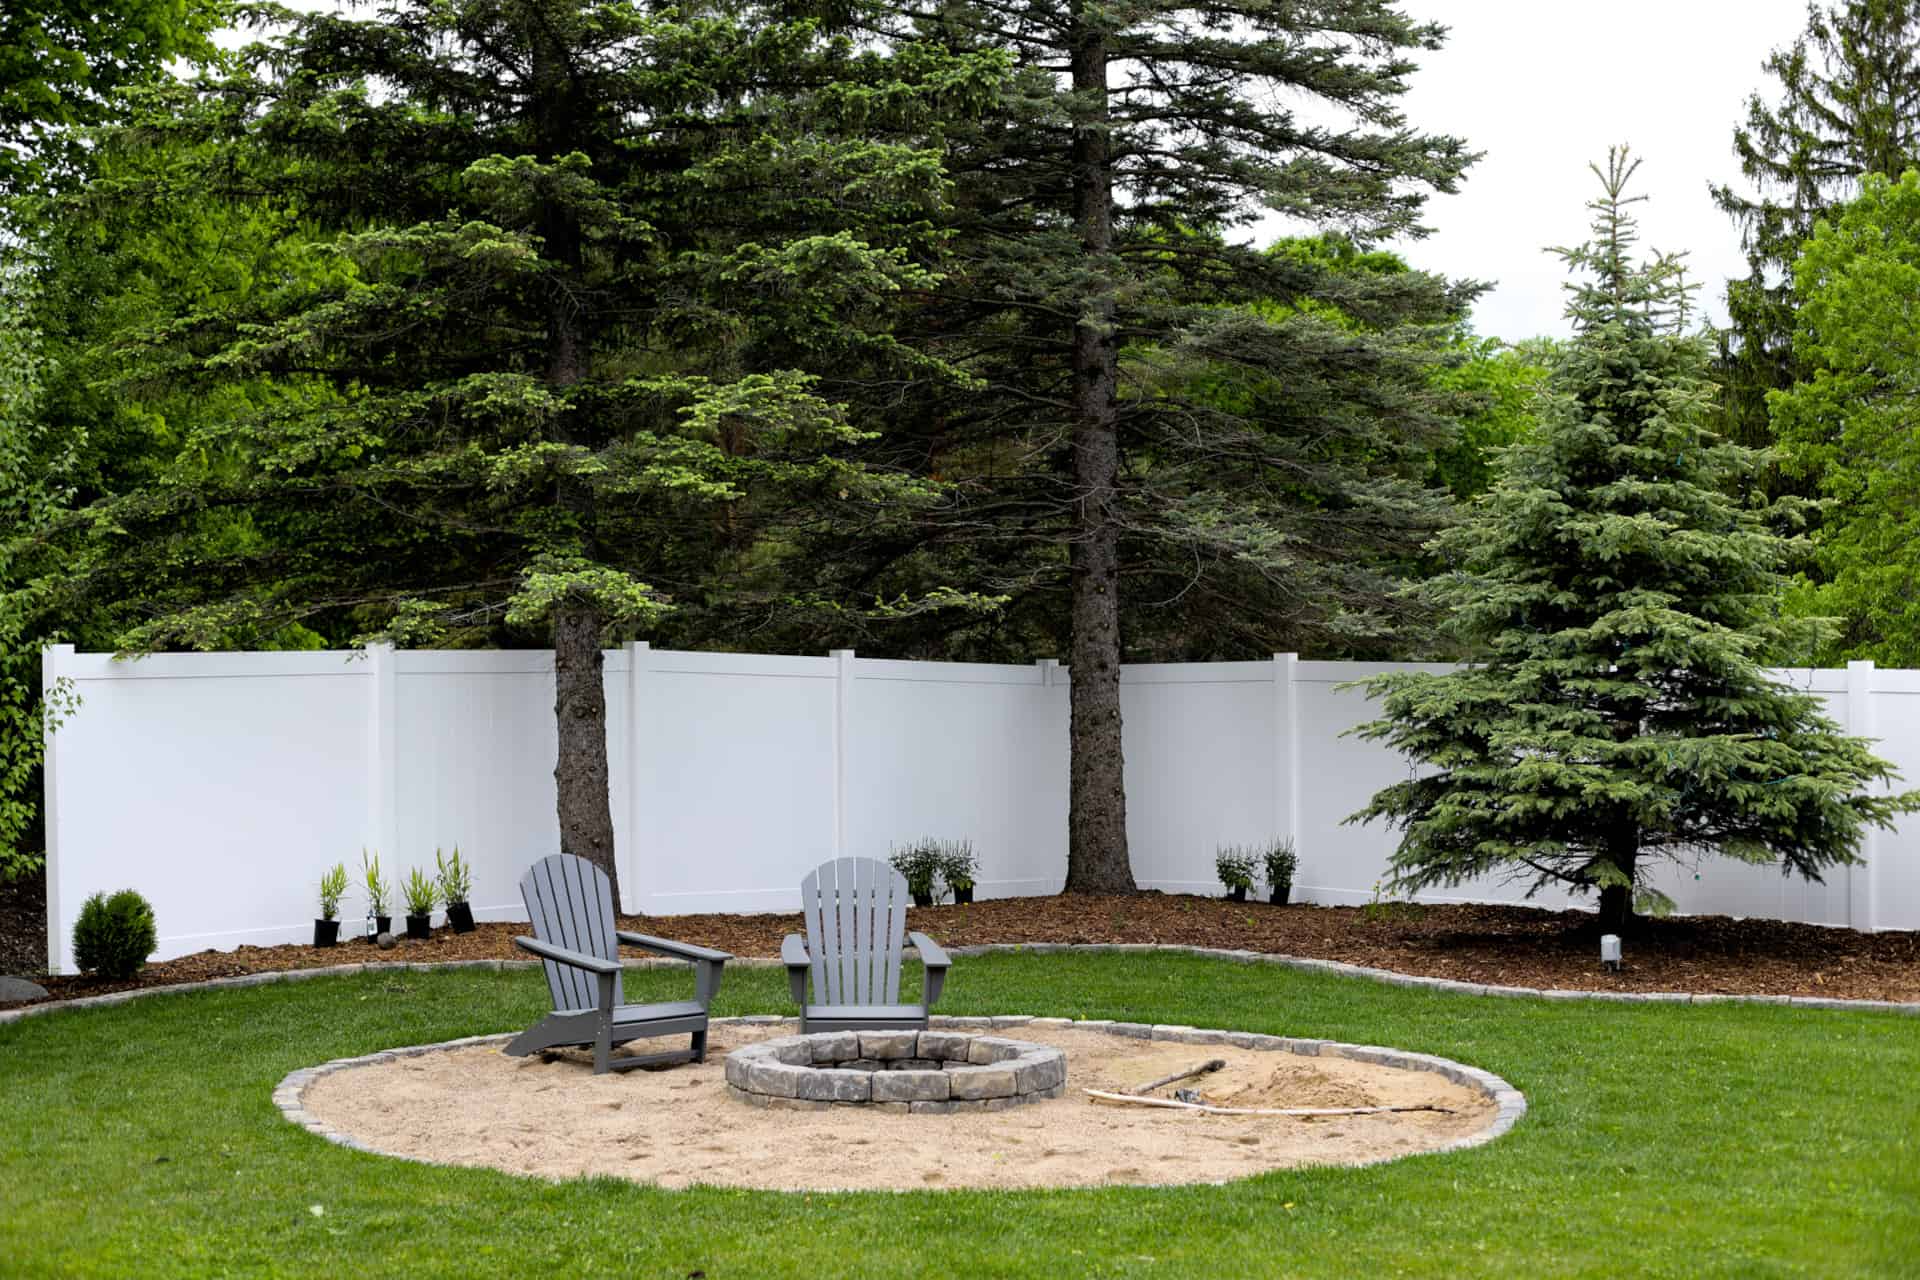 backyard privacy fencing around patio set and firepit